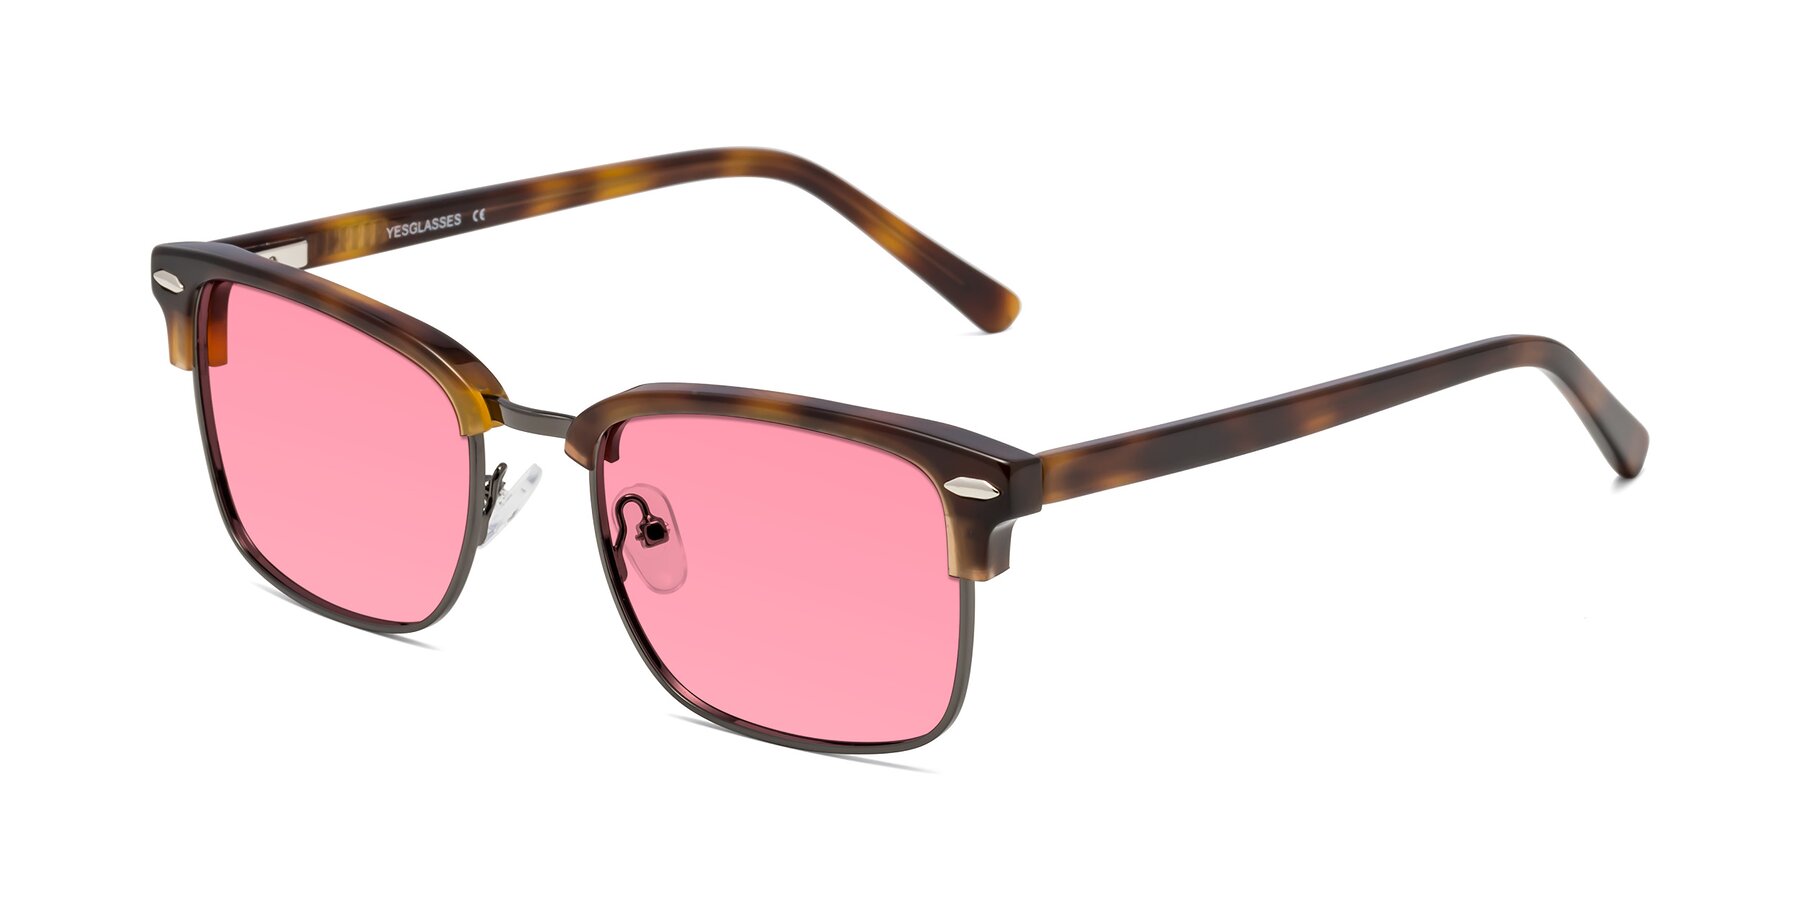 Angle of 17464 in Tortoise/ Gunmetal with Pink Tinted Lenses